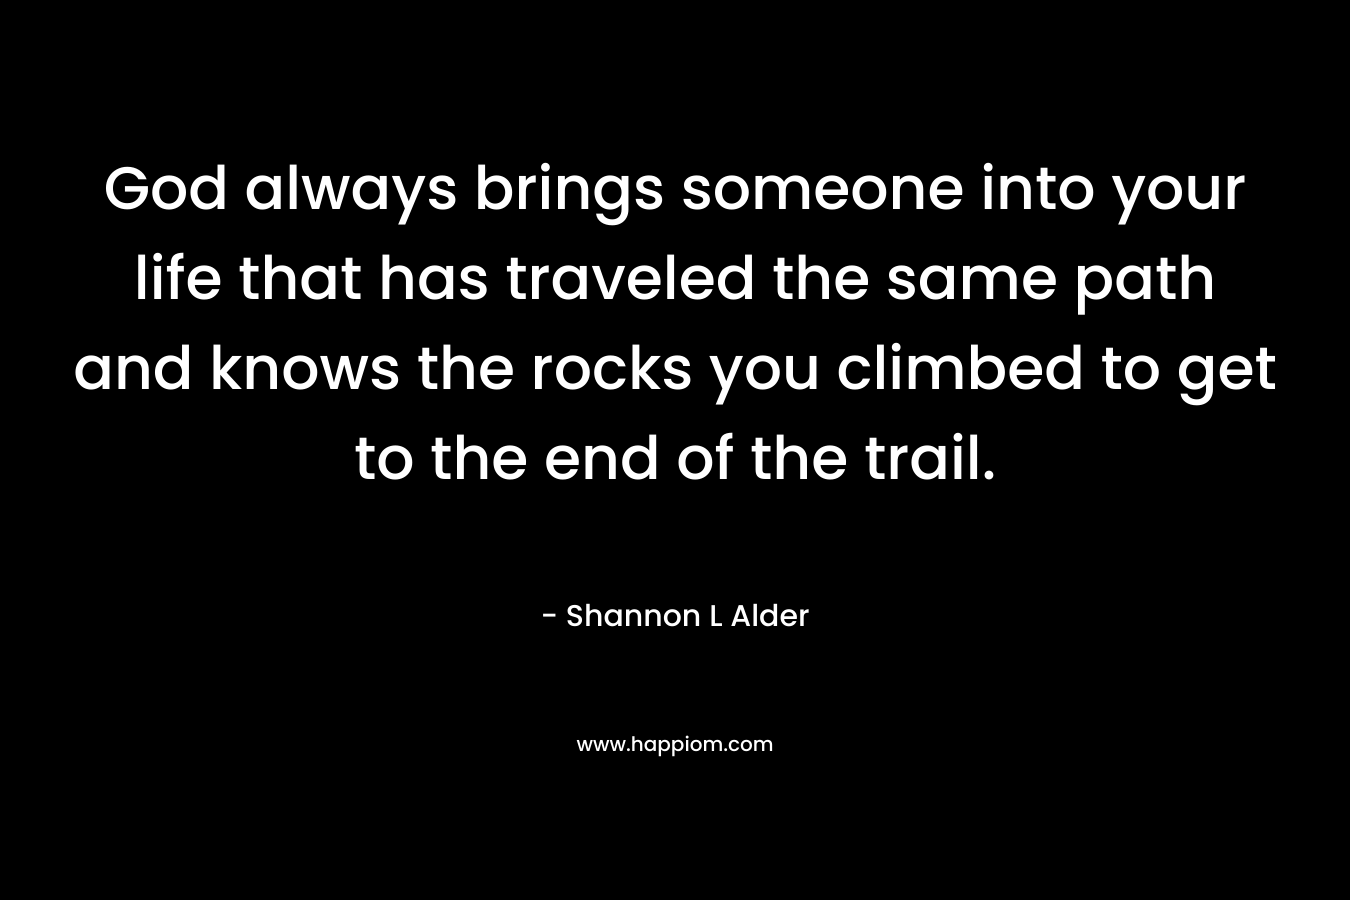 God always brings someone into your life that has traveled the same path and knows the rocks you climbed to get to the end of the trail. – Shannon L Alder